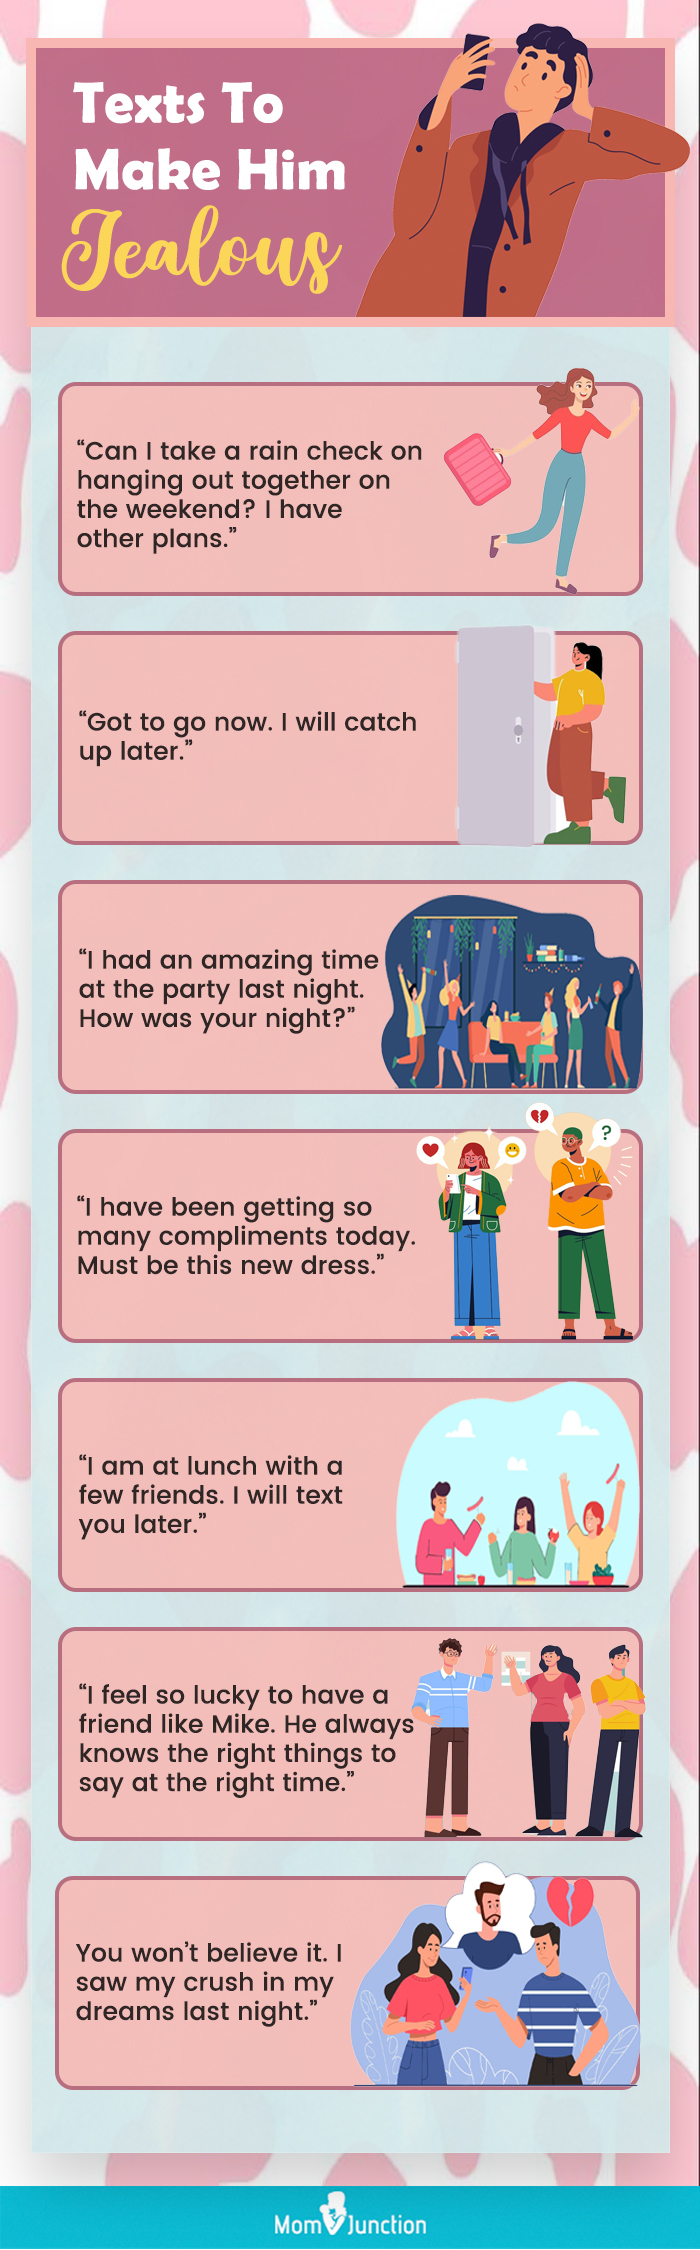 texts to make him jealous (infographic)